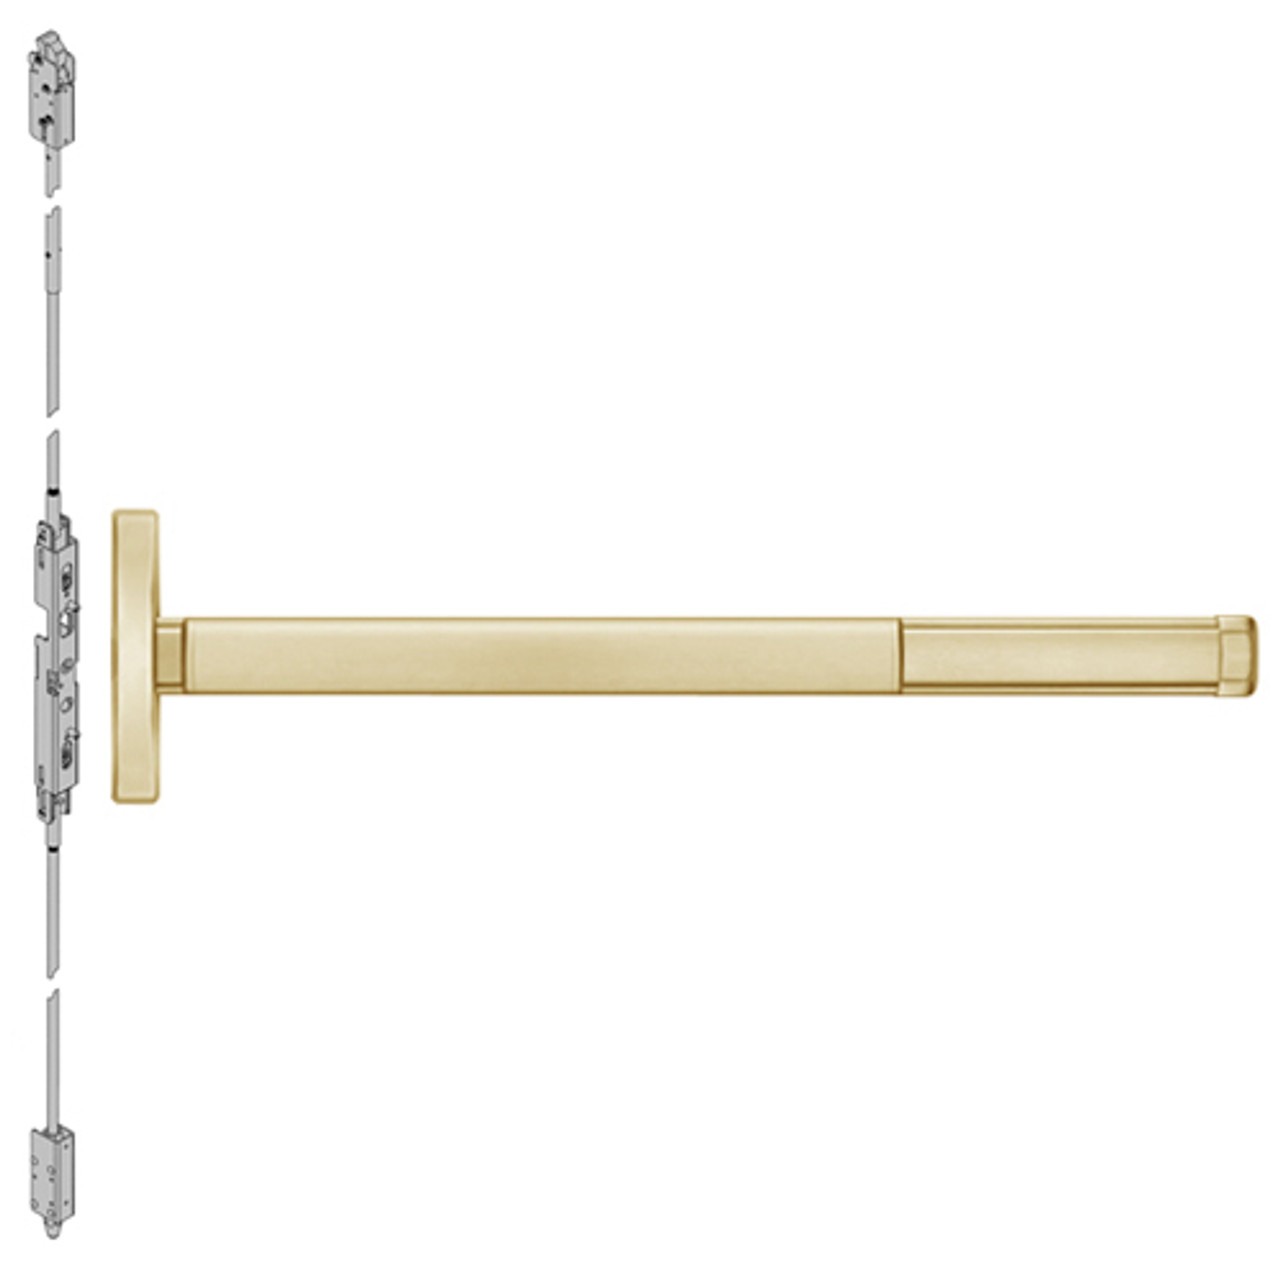 ELR2603LBR-606-48 PHI 2600 Series Concealed Vertical Rod Exit Device with Electric Latch Retraction Prepped for Key Retracts Latchbolt in Satin Brass Finish